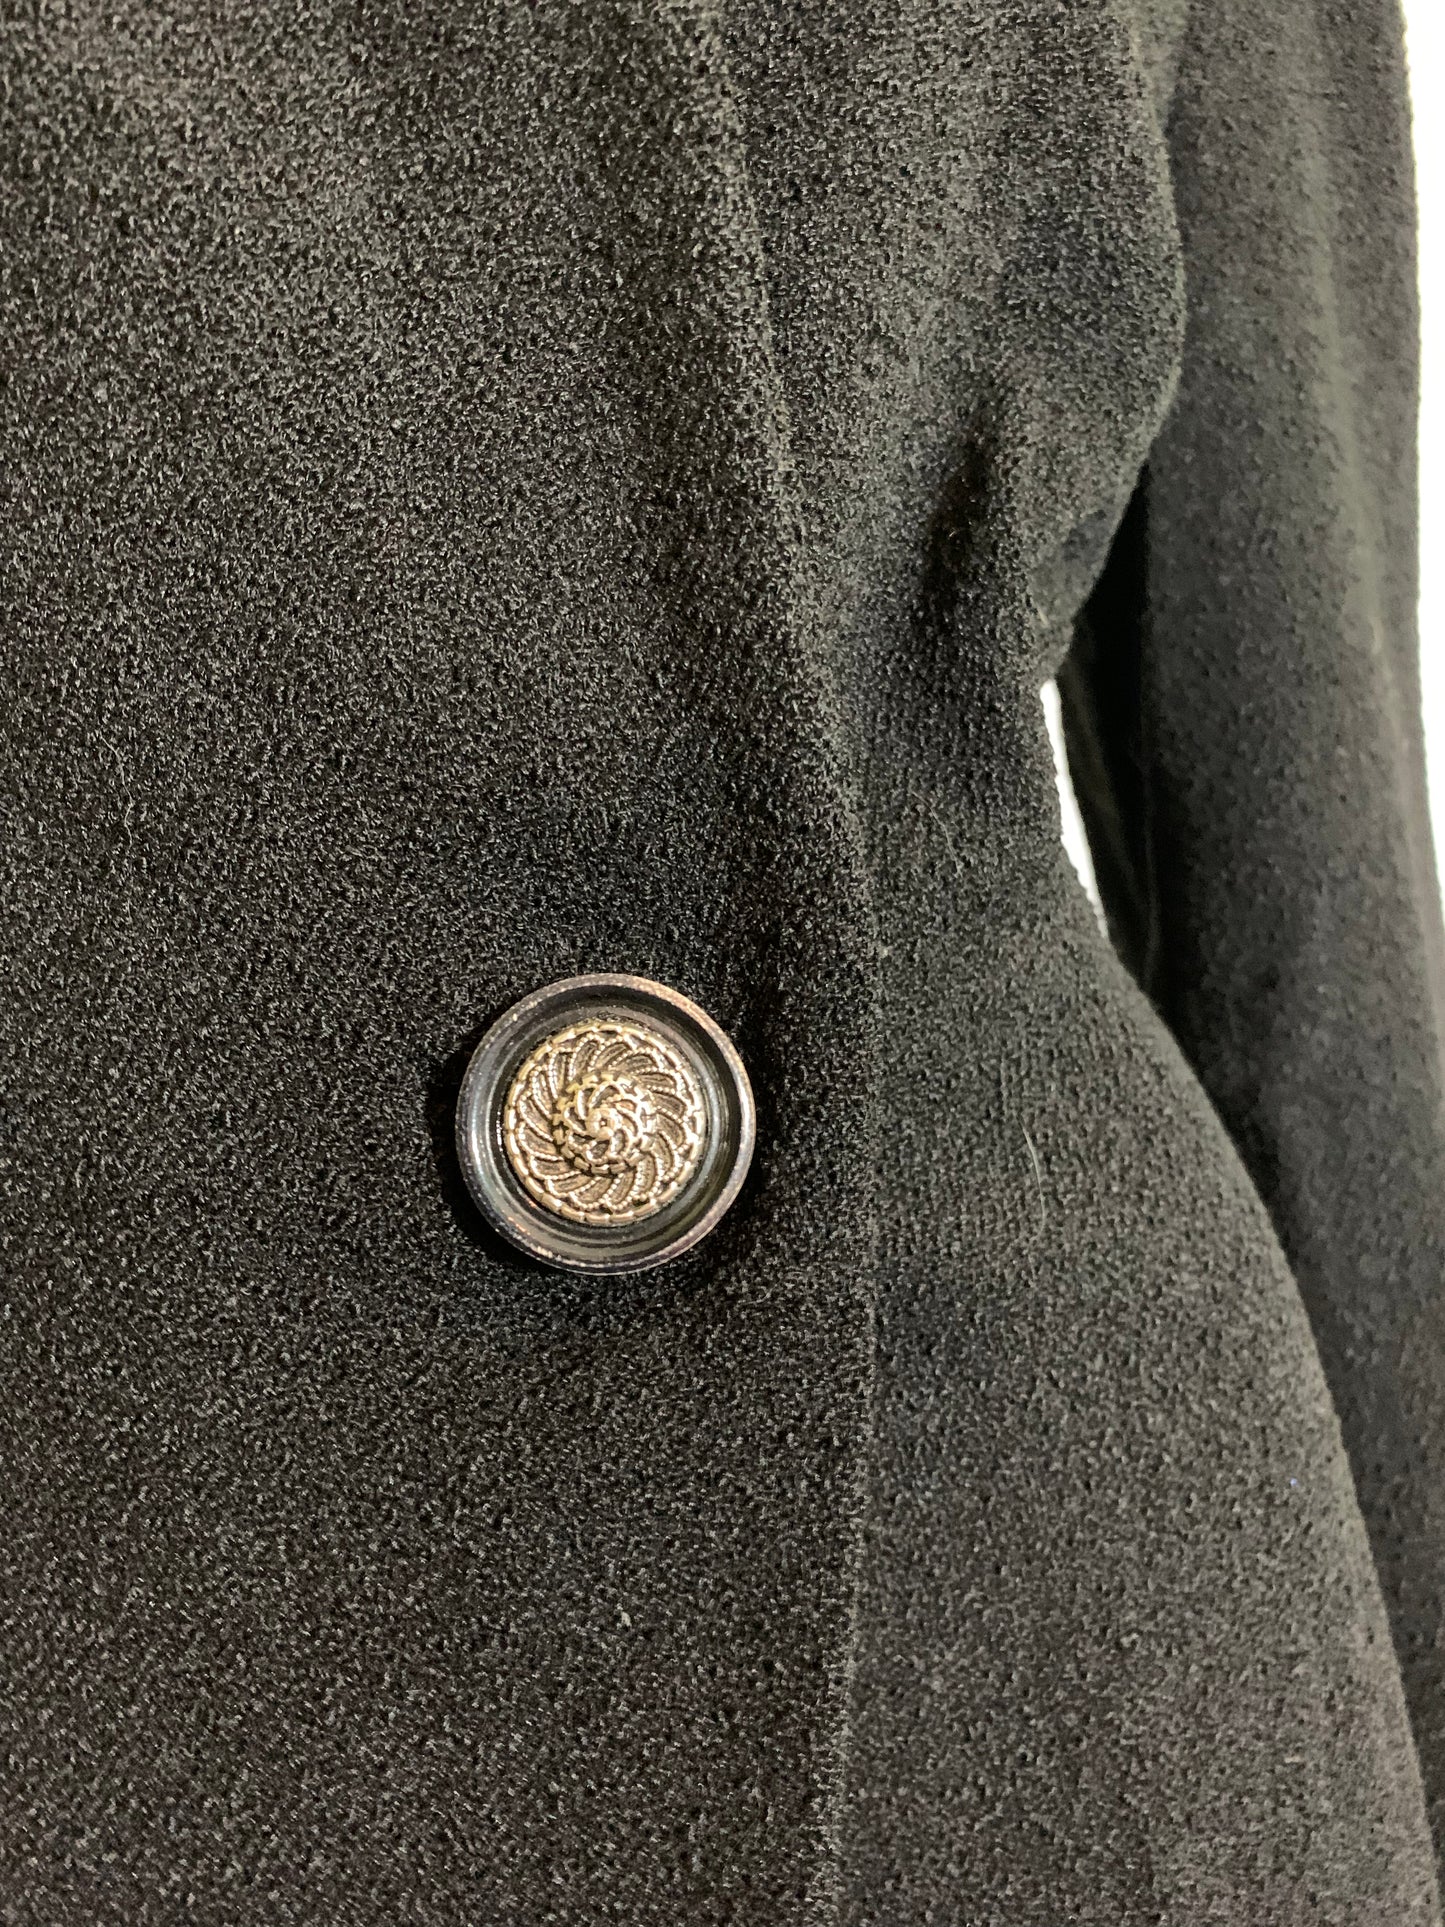 Nipped Waist Black Textured Wool Coat with Trapunto Stitched Shoulders circa 1940s